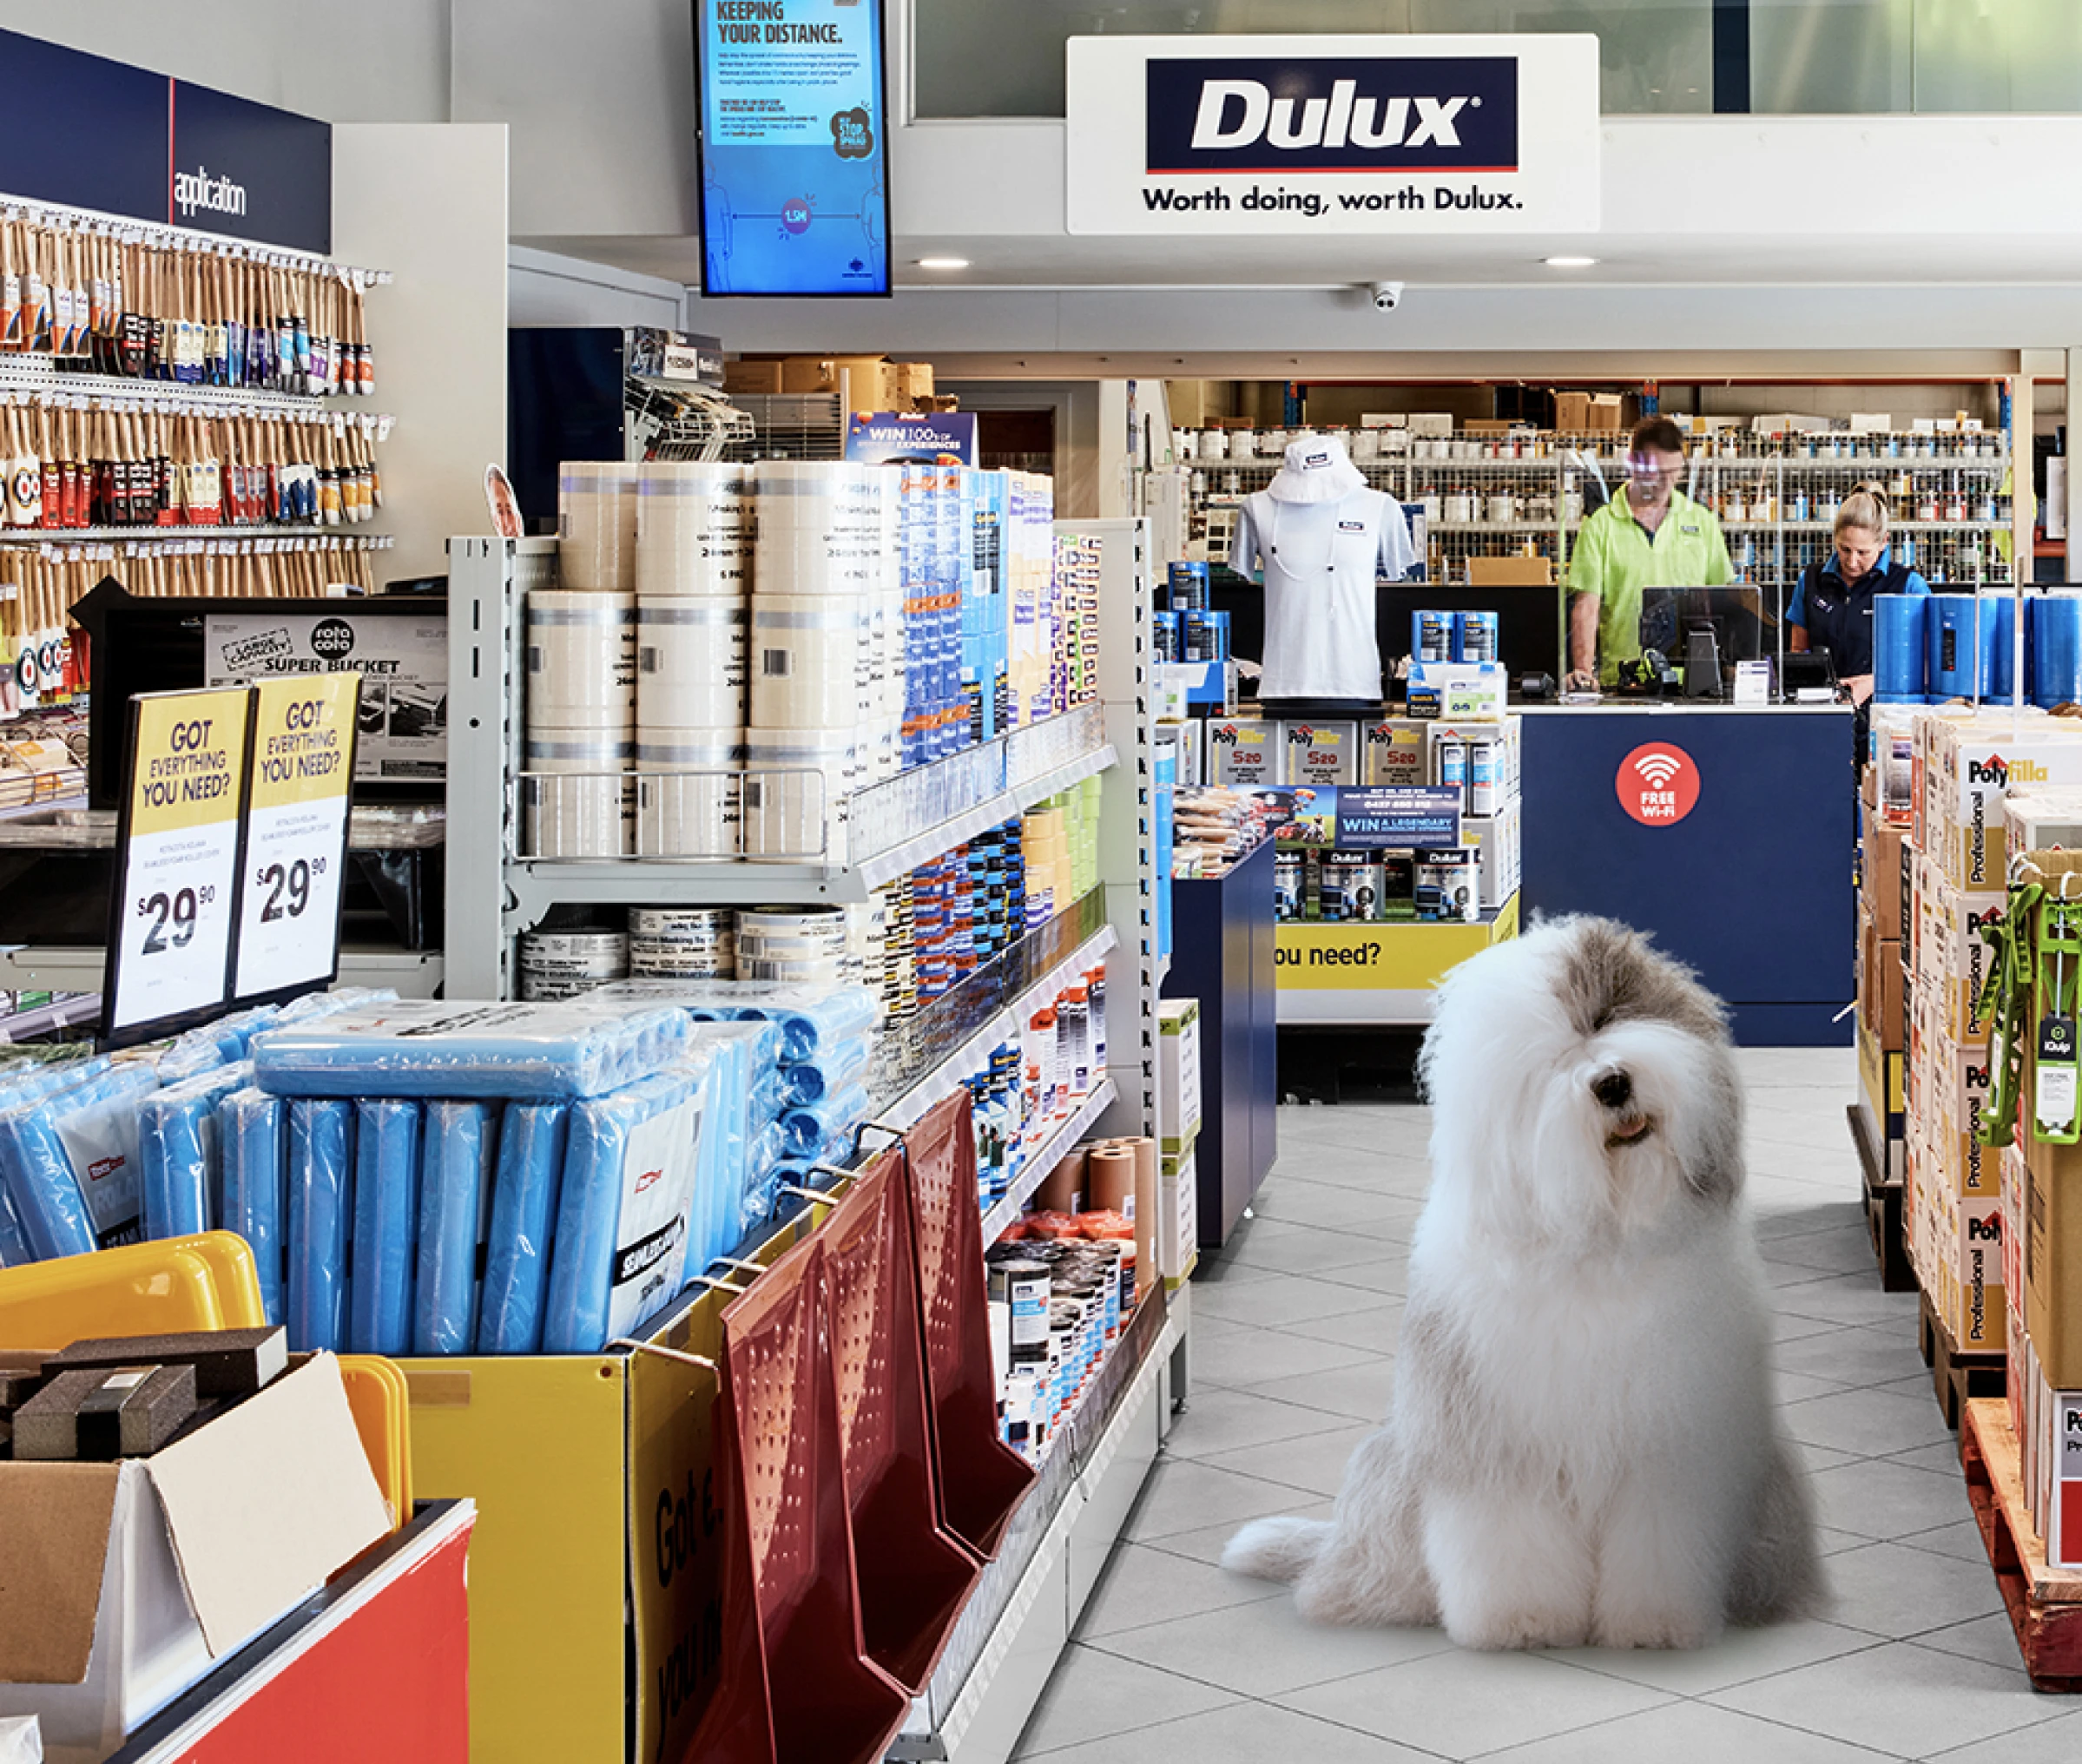 Dulux store interior with Dulux dog and staff in the background 